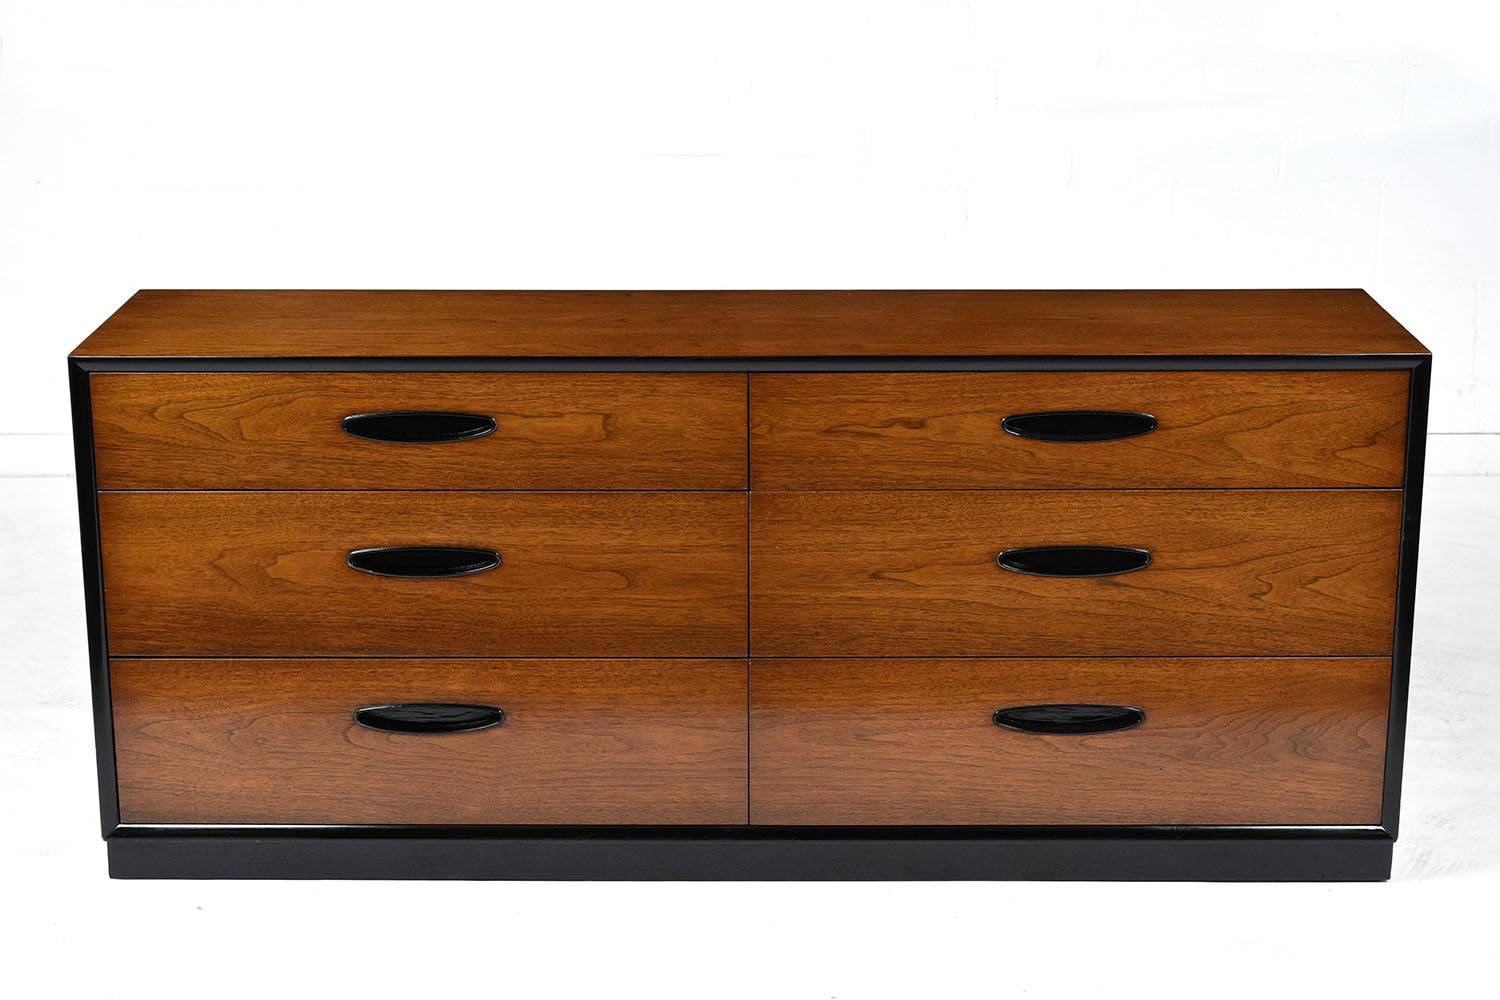 This 1960s Mid-Century Modern style chest of drawers is stained a rich walnut color with black accents and a lacquered finish. The six drawers have carved handles into the front stained in a black color. The chest has a pedestal base that is stained